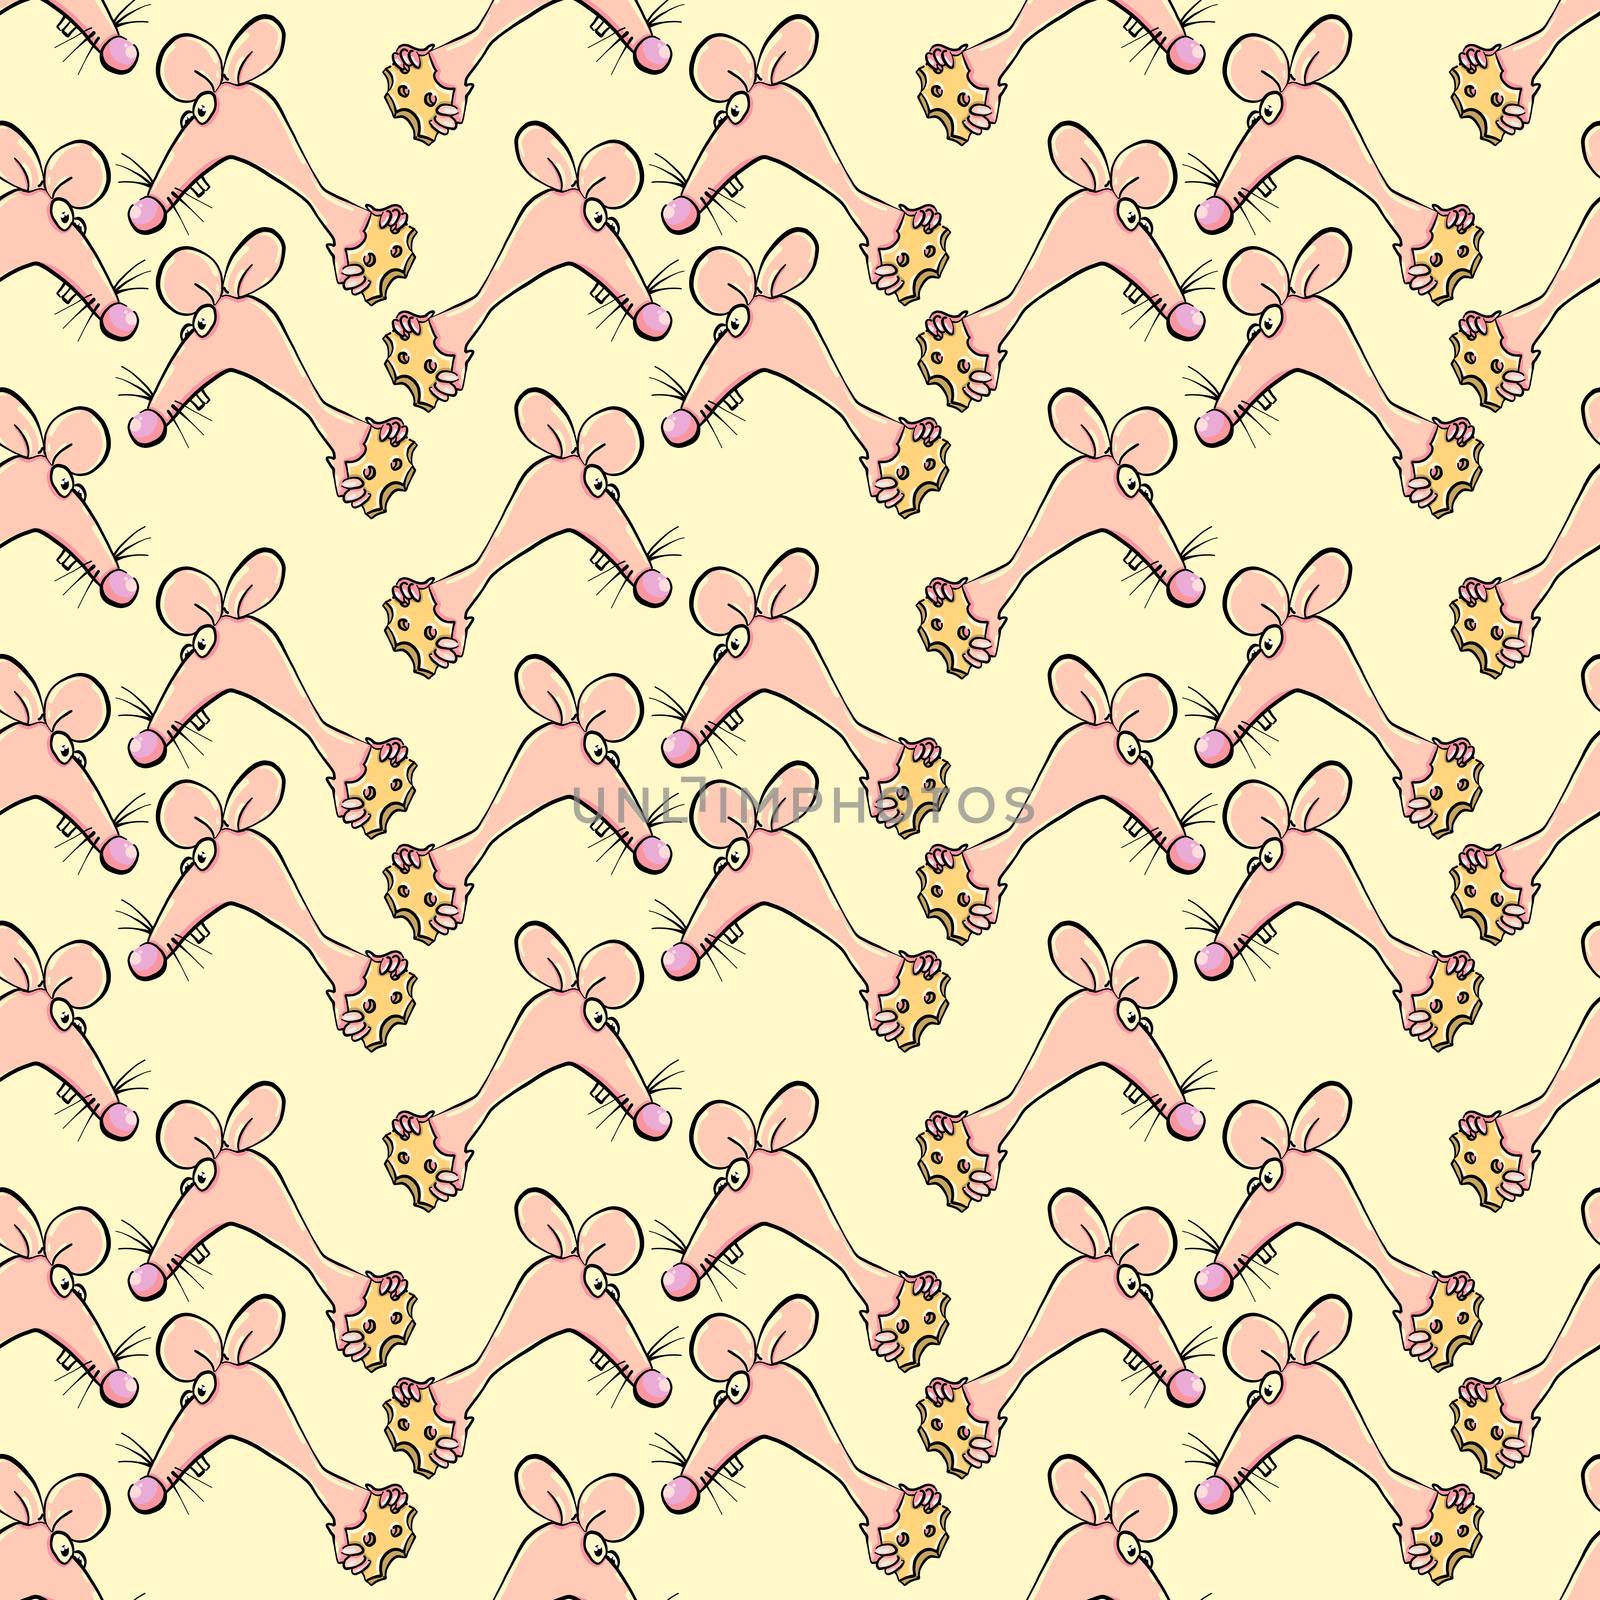 Mouse pattern , illustration, vector on white background